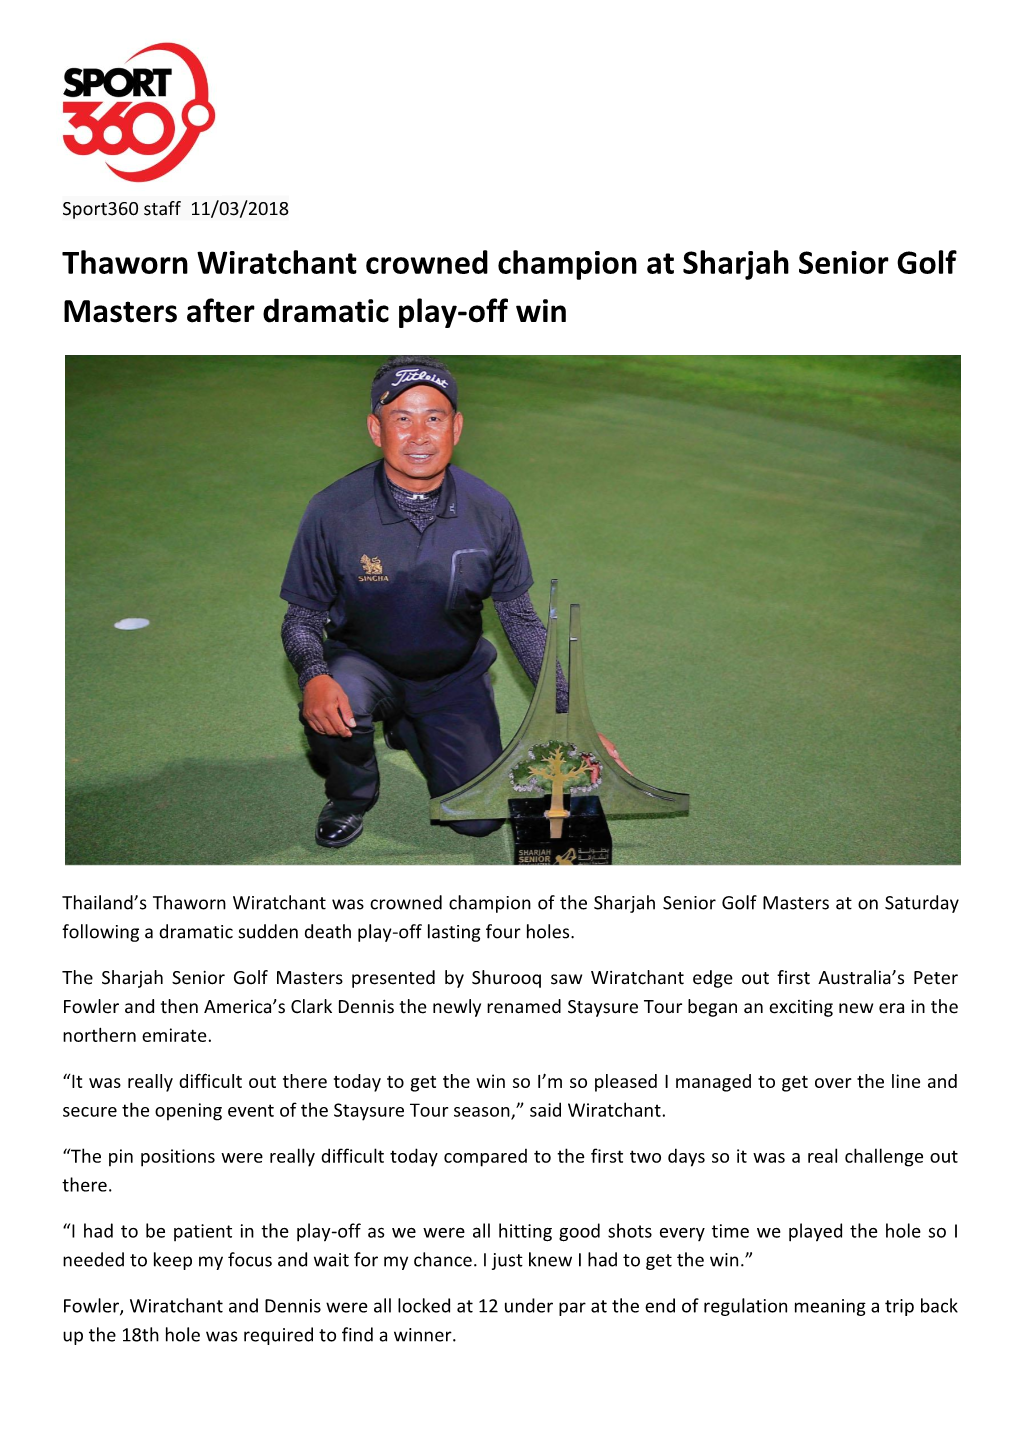 Thaworn Wiratchant Crowned Champion at Sharjah Senior Golf Masters After Dramatic Play-Off Win